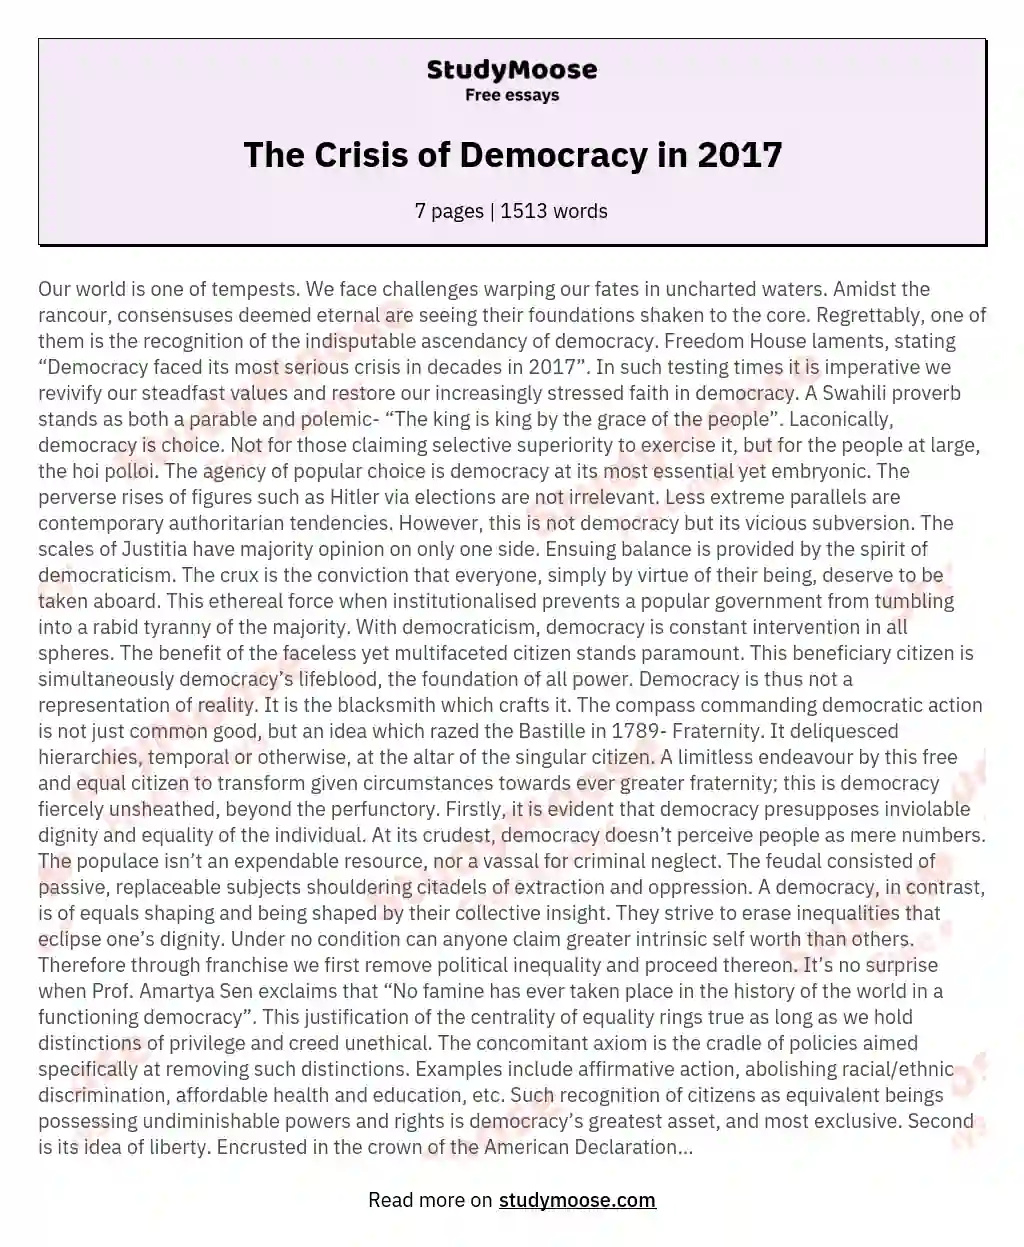 The Crisis of Democracy in 2017 essay